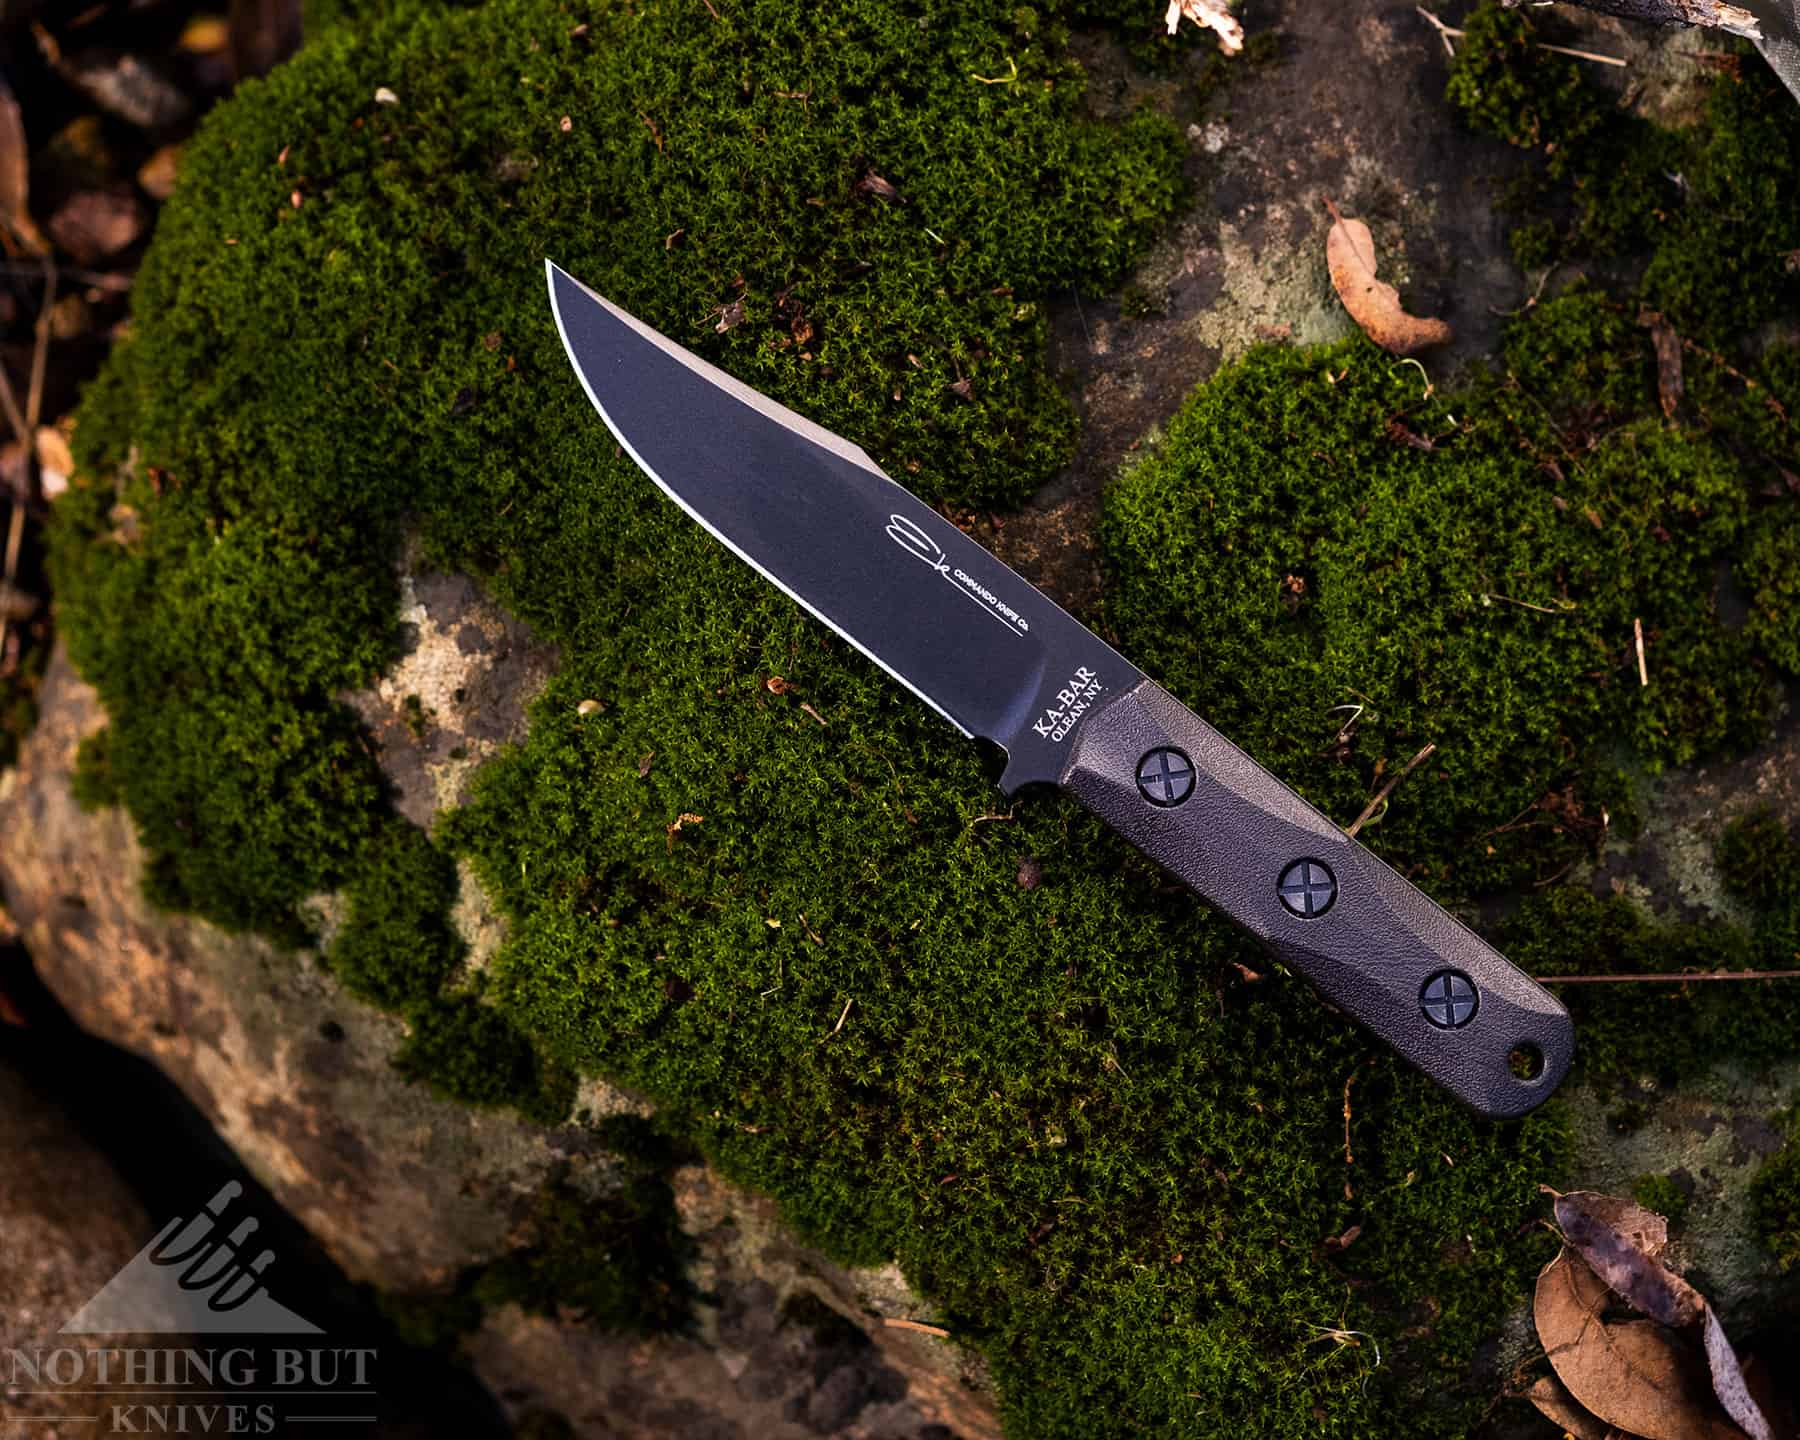 The new Ka-Bar version of the Commando knife have an entirely different focus. These are still solid fighting knives, but they’re designed to function as camp knives, too. 